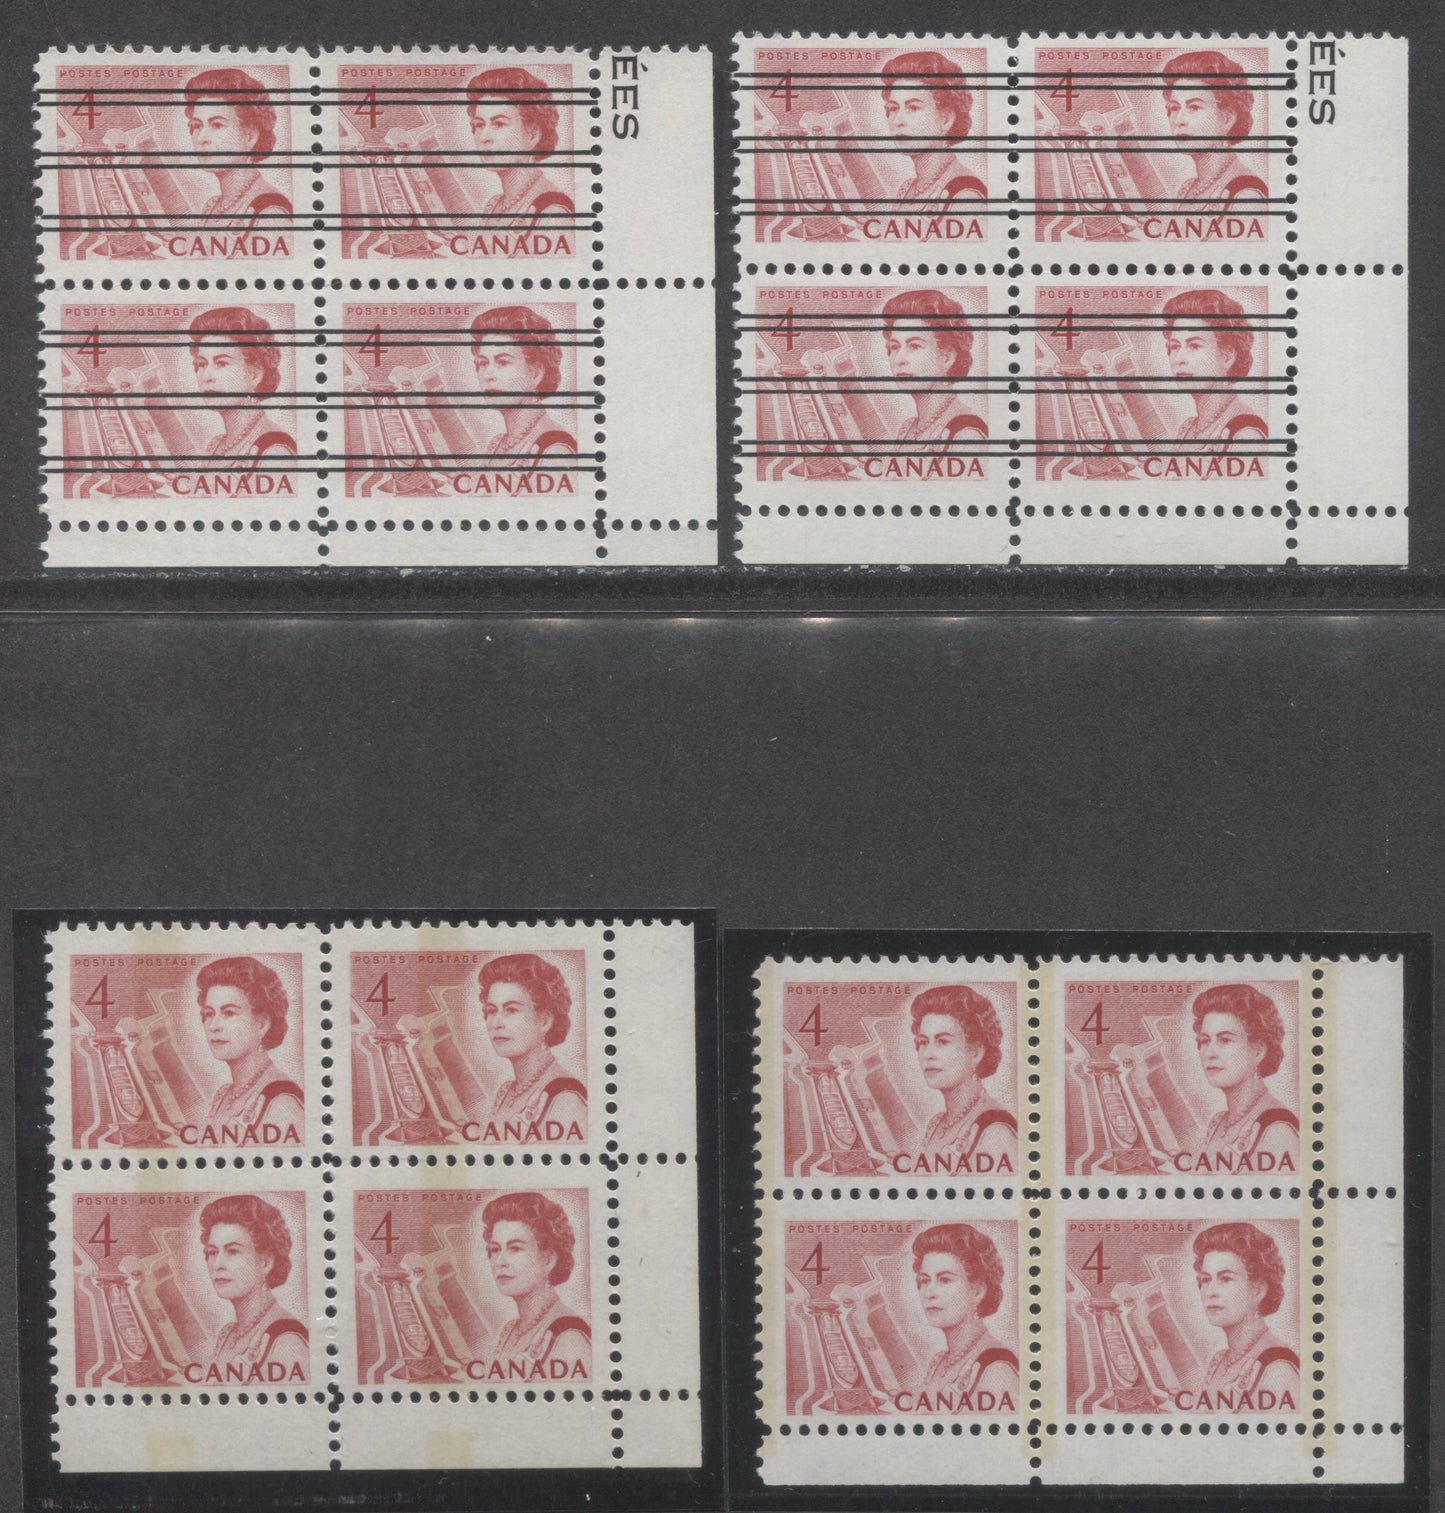 Lot 97 Canada #457pii,piv,xx,xxii 4c Light & Bright Carmine Rose Queen Elizabeth II, 1967-1973 Centennial Issue, 4 VFNH GT2 & W1C Tagged & Untagged Blank Blocks Of 4 On NF, DF1 & MF6 Papers With PVA & Smooth Dex Gums, Various Reds Under UV